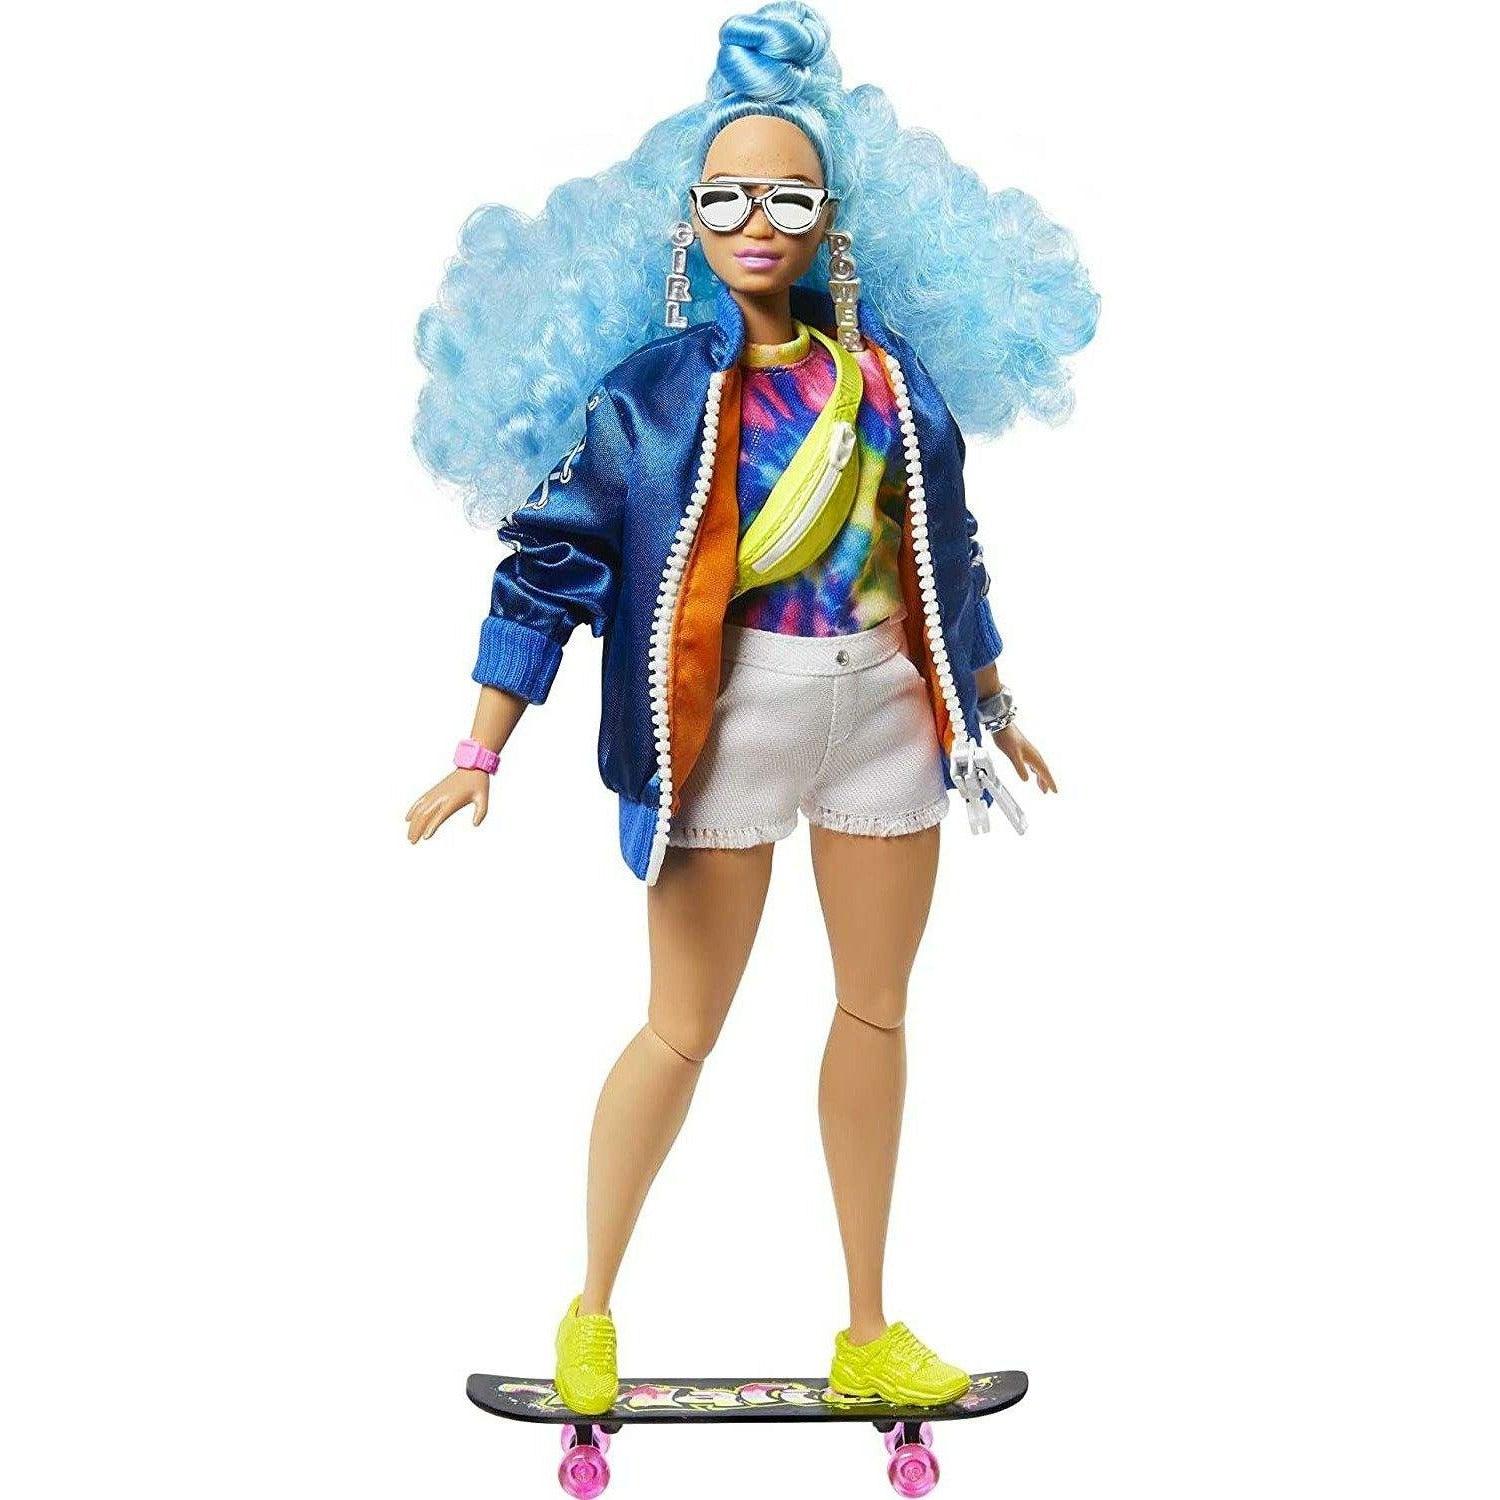 Barbie Extra Doll #4, Curvy, In Zippered Bomber Jacket With 2 Pet Kittens, Extra-Curly Blue Hair, Layered Outfit & Accessories - BumbleToys - 5-7 Years, Barbie, Fashion Dolls & Accessories, Girls, OXE, Pre-Order